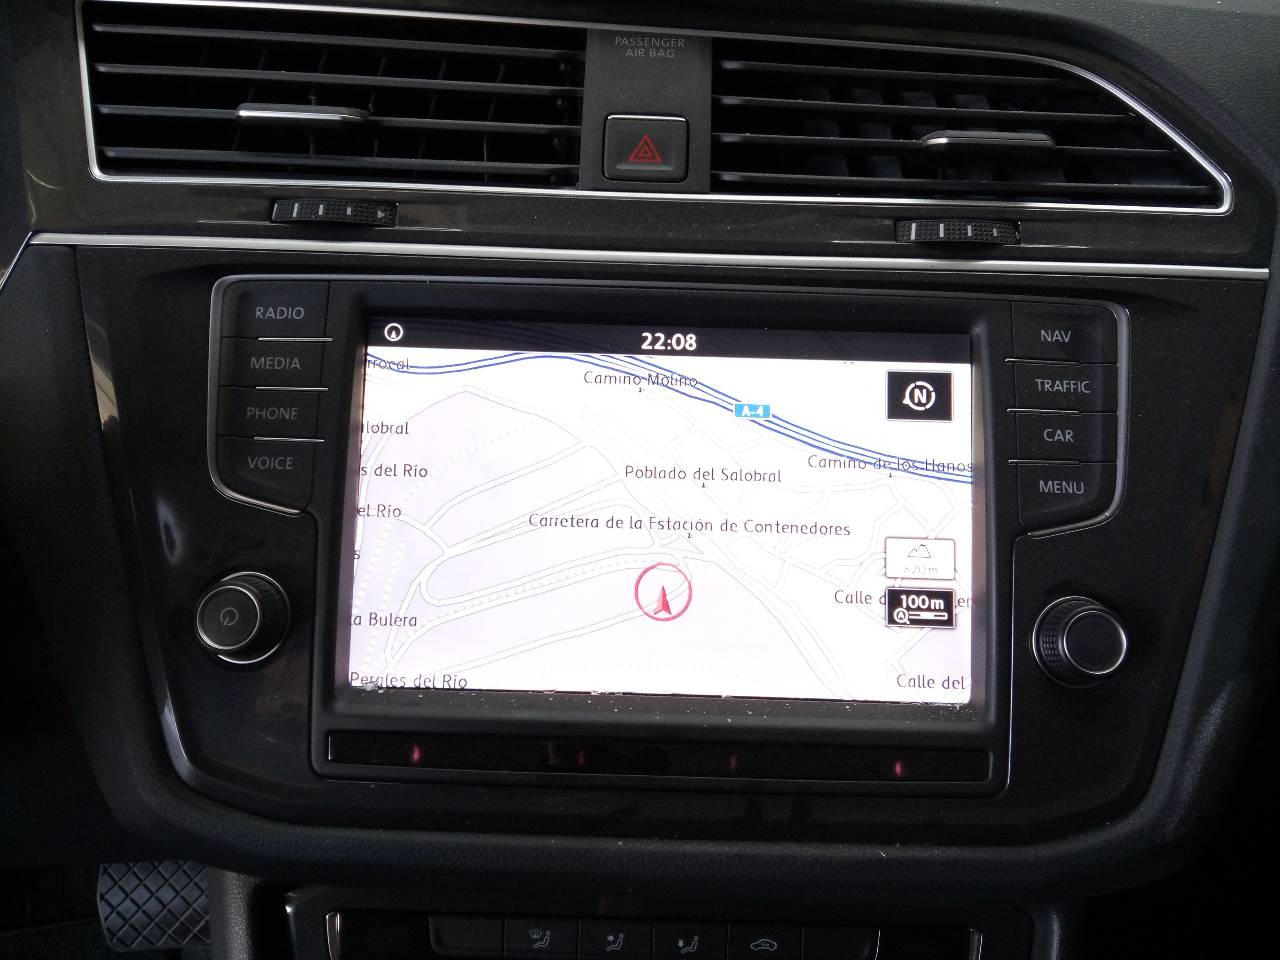 VOLKSWAGEN Tiguan 1 generation (2007-2017) Music Player With GPS 5G0919606, 3Q0035846A, E2-A1-33-3 21793564